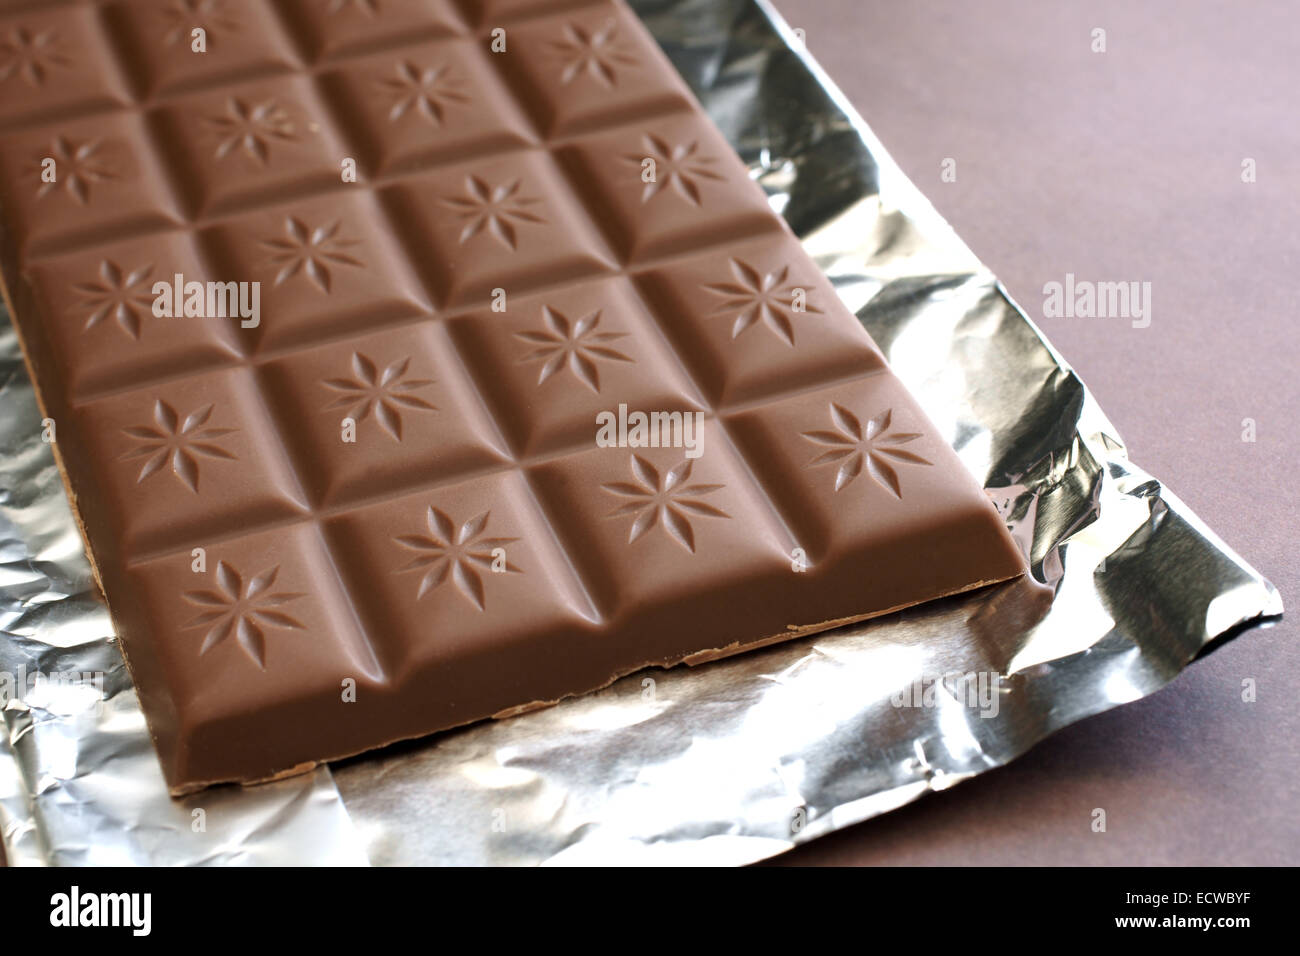 Bar of milk chocolate on a foil wrapper Stock Photo